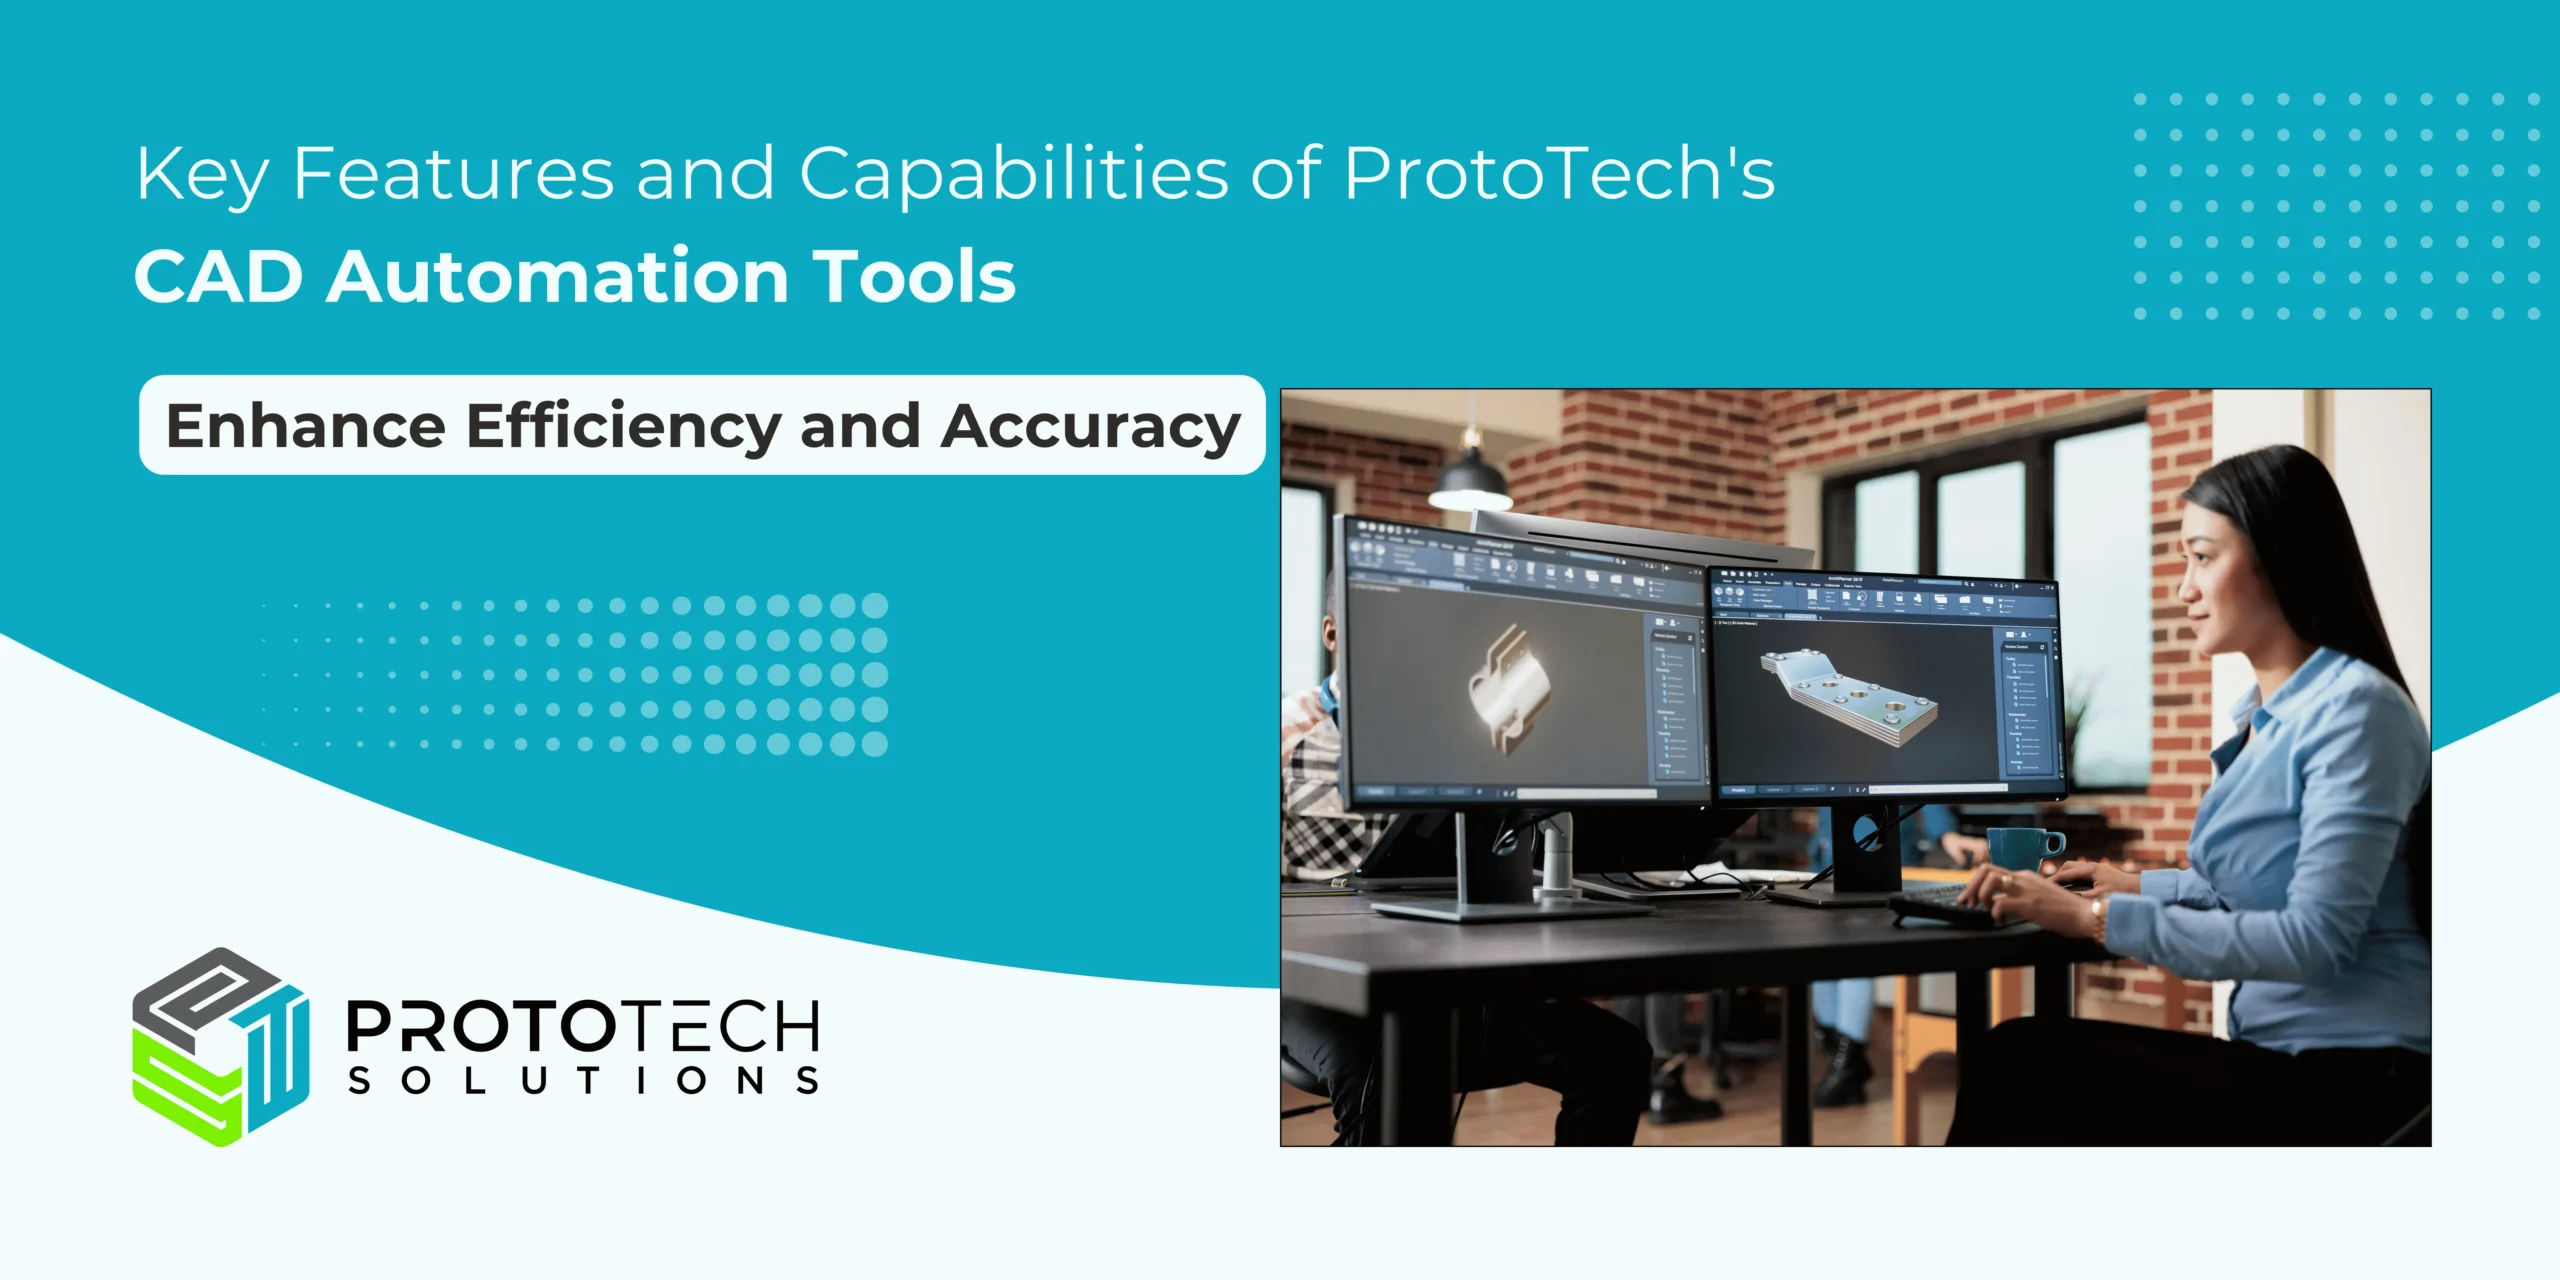 Key Features and Capabilities of ProtoTech's CAD Automation Tools